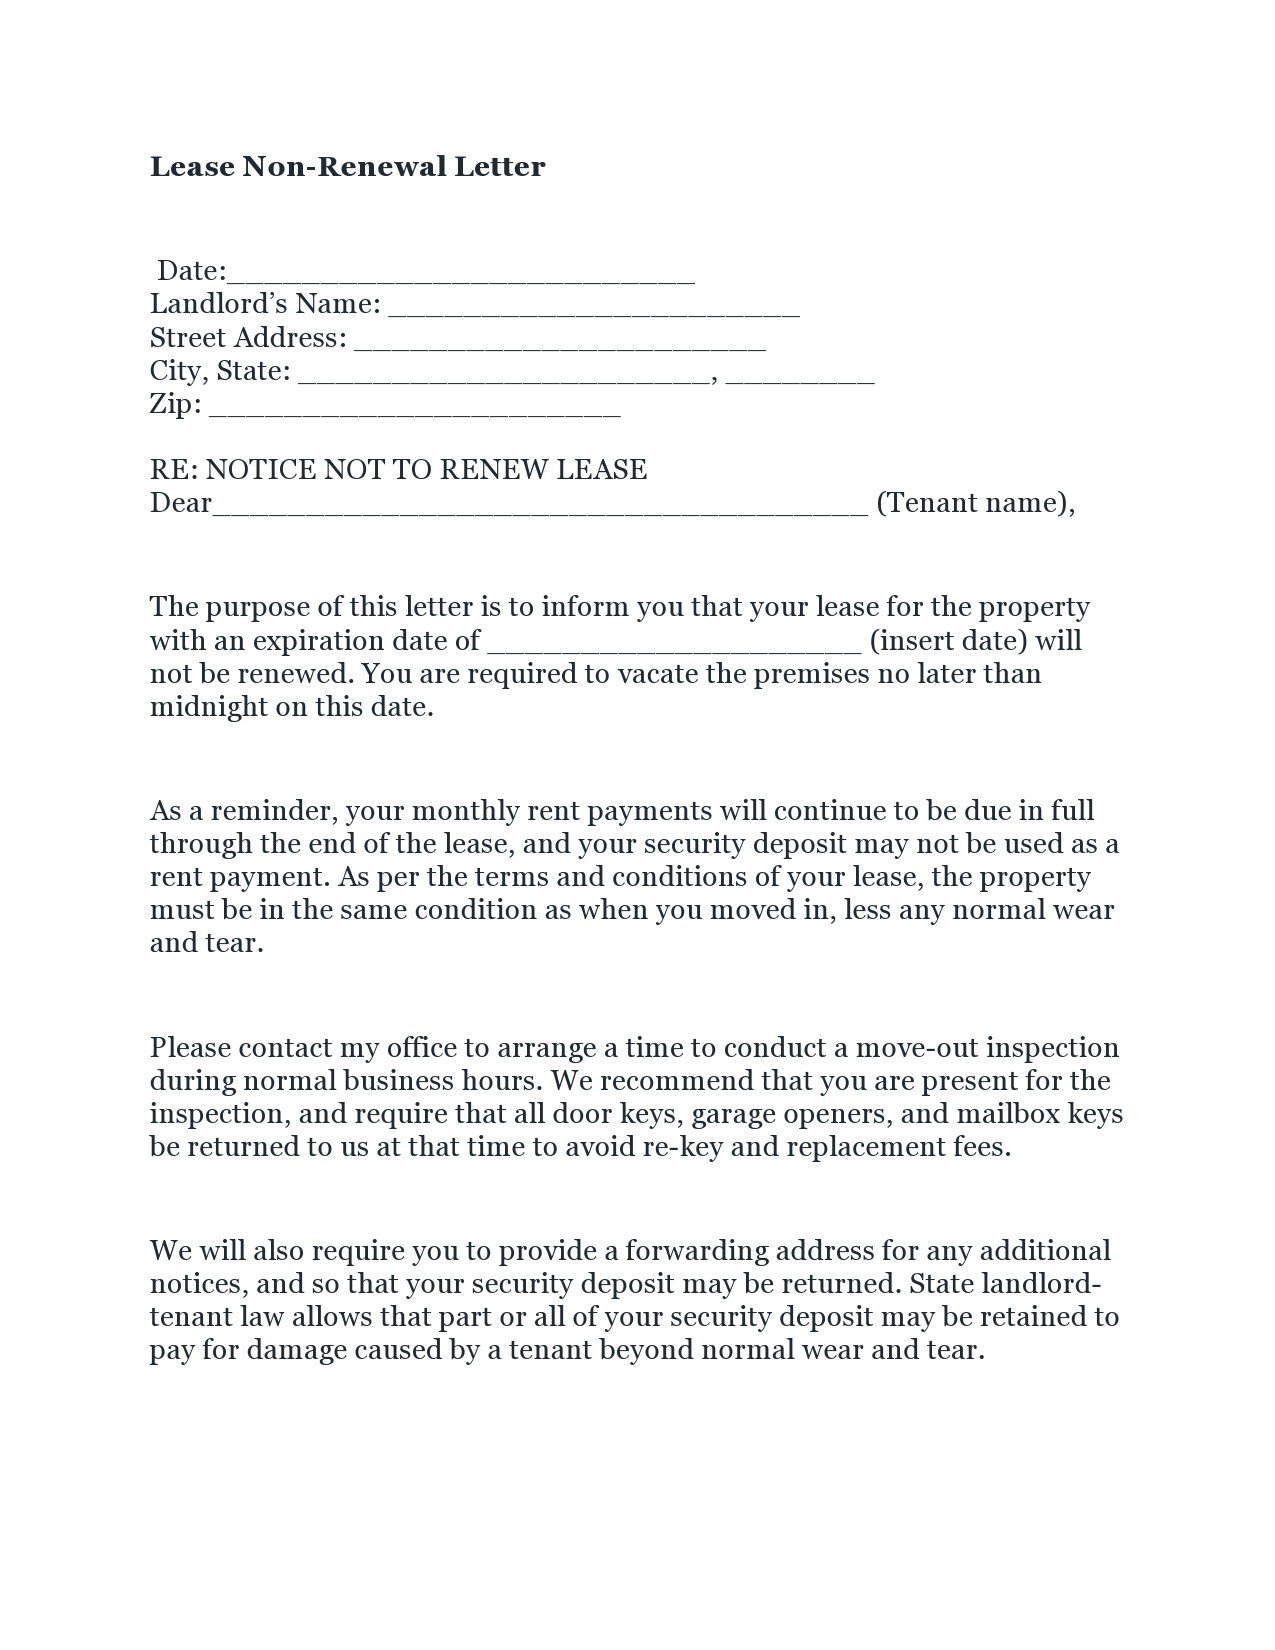 Free not renewing lease letter 08